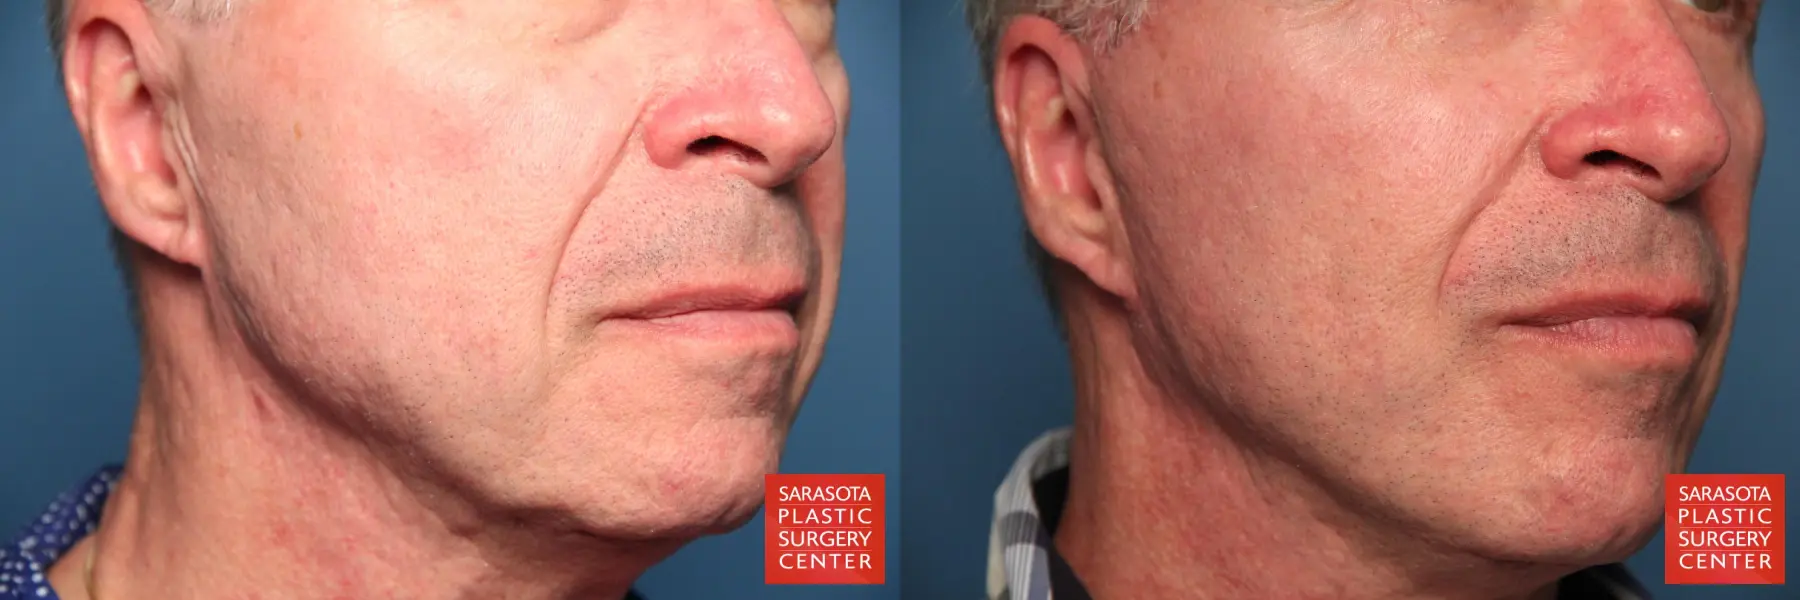 Fat Transfer   Face For Men: Patient 1 - Before and After 4